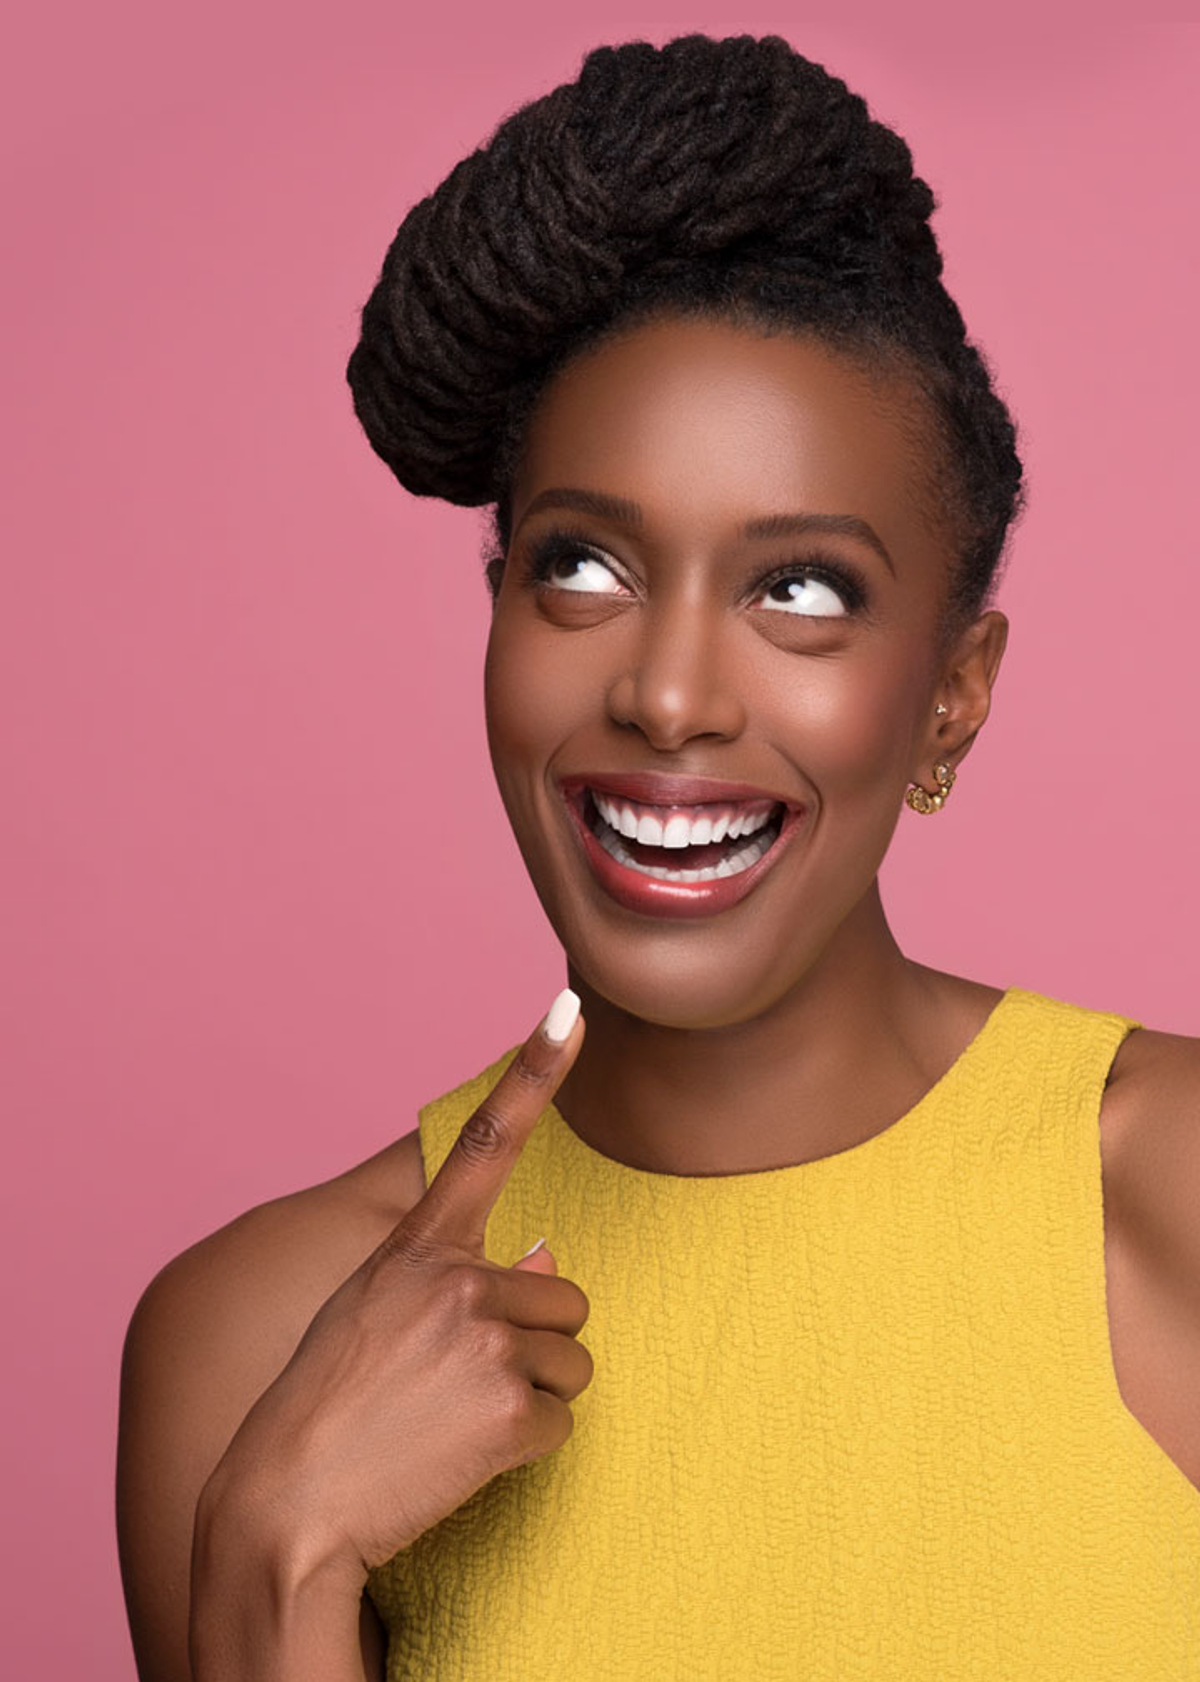 Tips on Creating from Chescaleigh